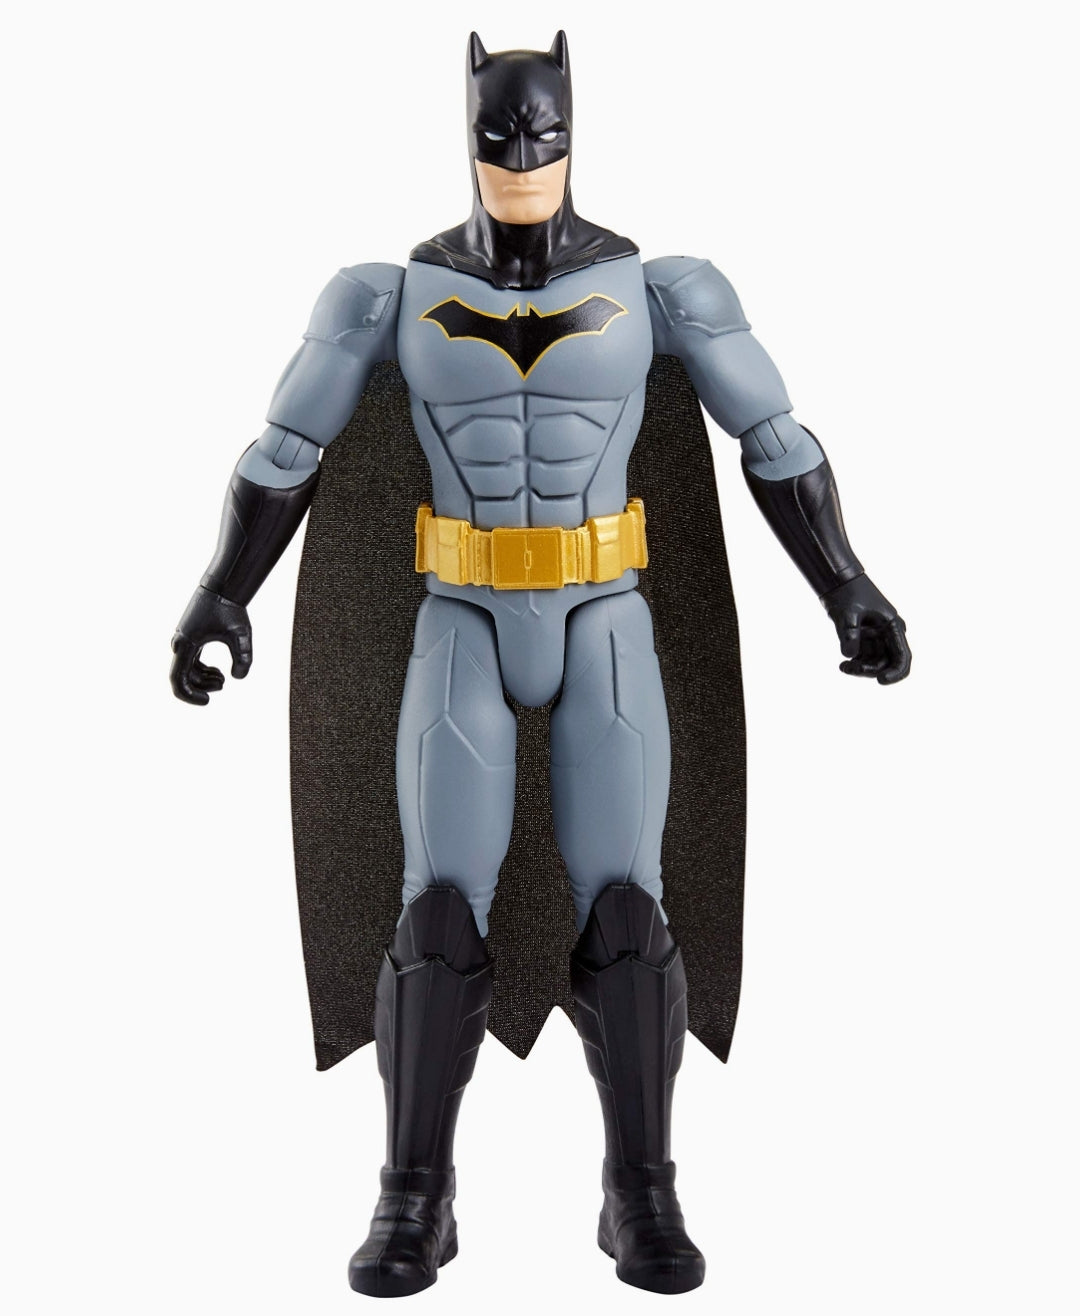 NEW *BATMAN Missions True Moves 12" DC Action Figure in Box